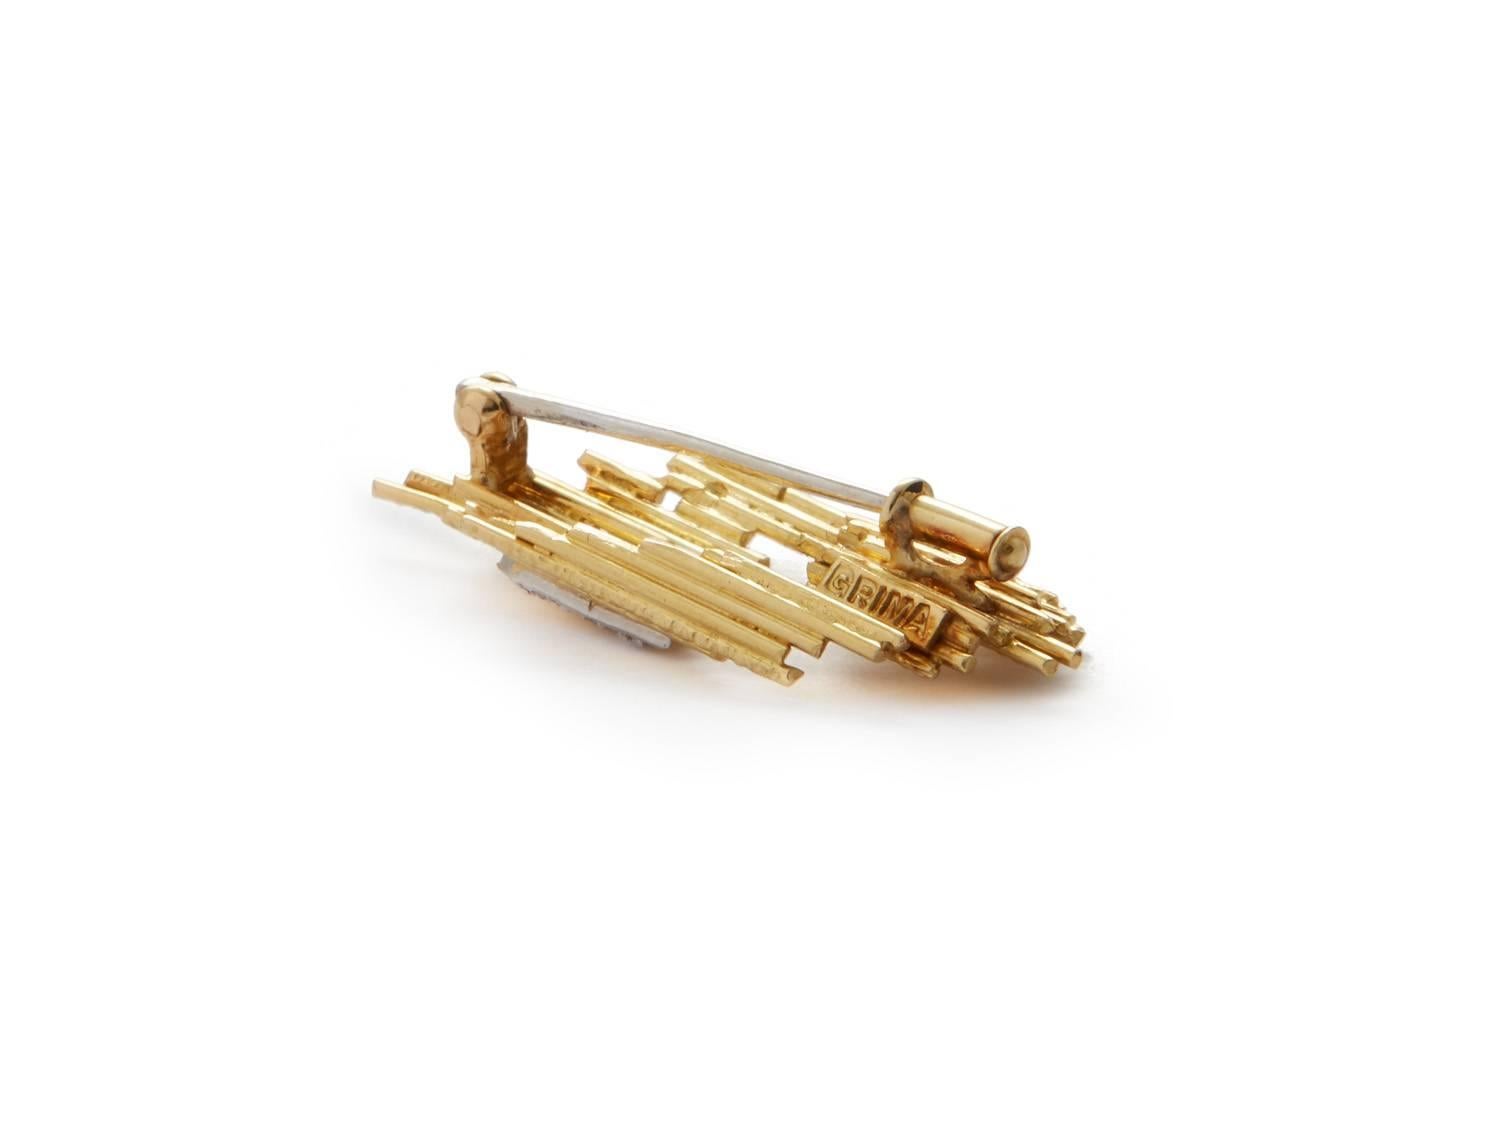 Andrew Grima, Untitled Brooch, Small, c. 1970, 'GRIMA' plaque on reverse, 18k textured gold with 3 diamonds and pin. 

Andrew Grima (1921-2007) was born in Rome and settled in England at the age of five. He trained as an engineer and entered the